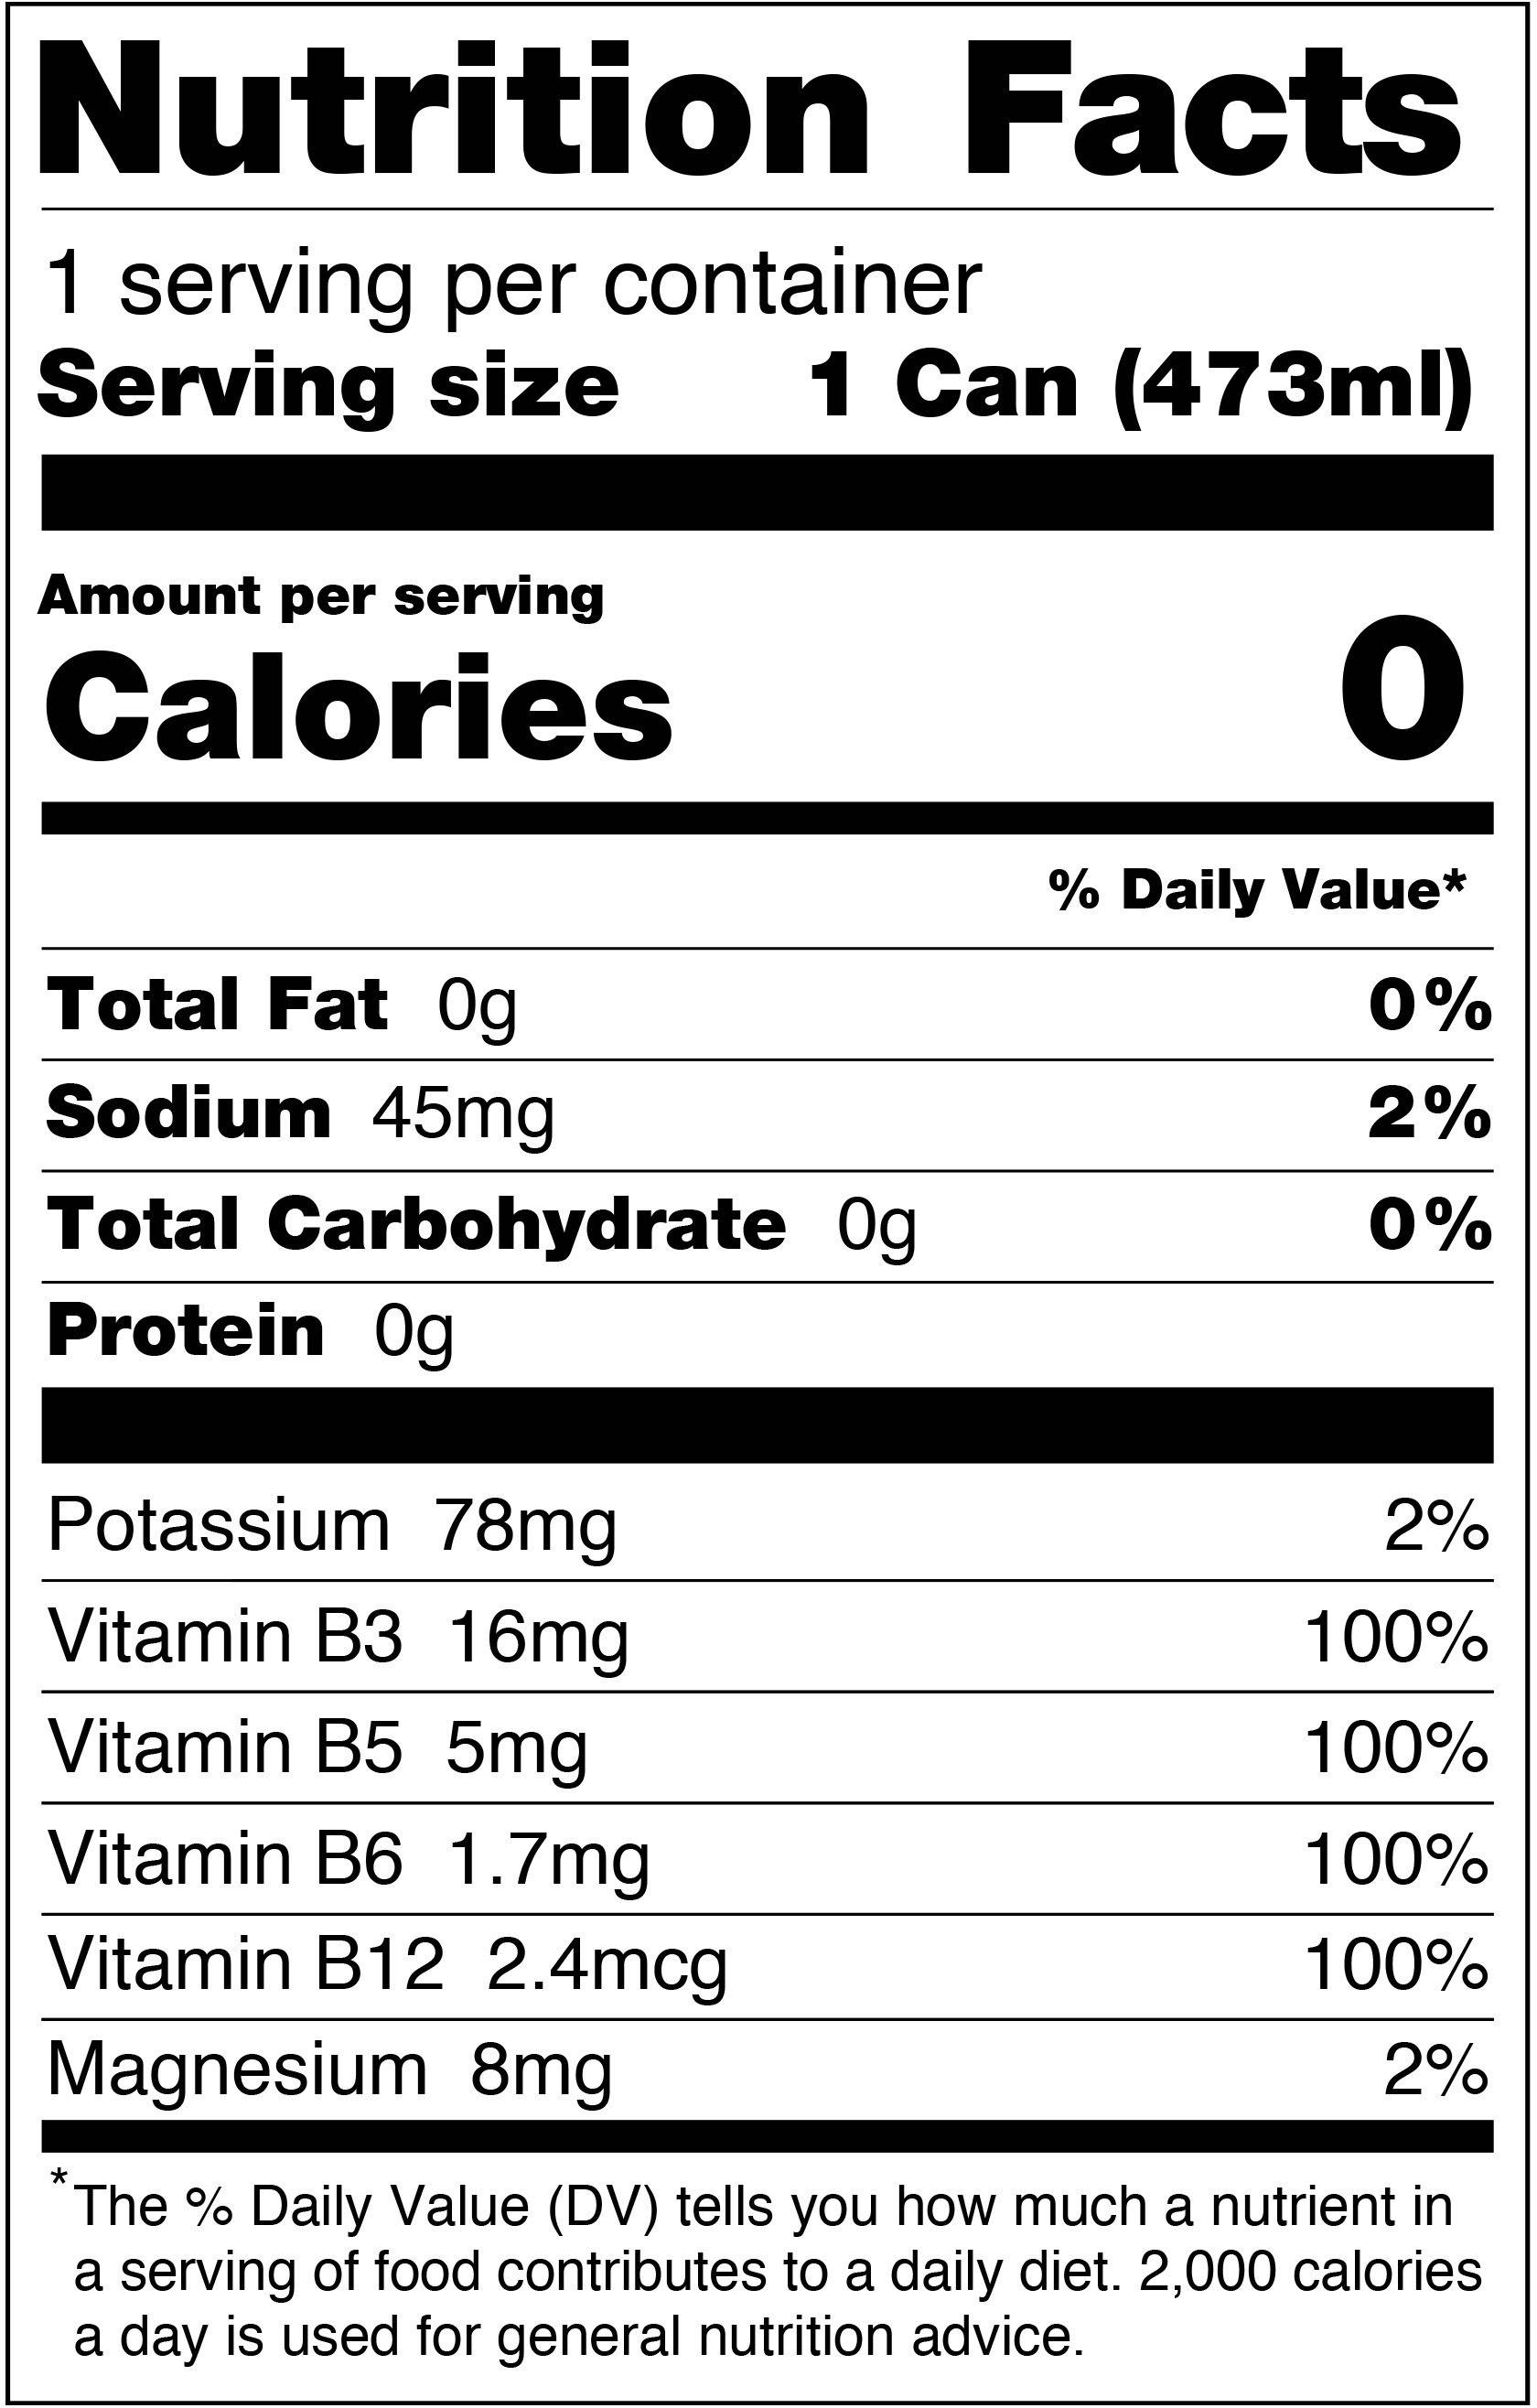 Image describing nutrition information for product Rockstar Thermo Tropical Fire